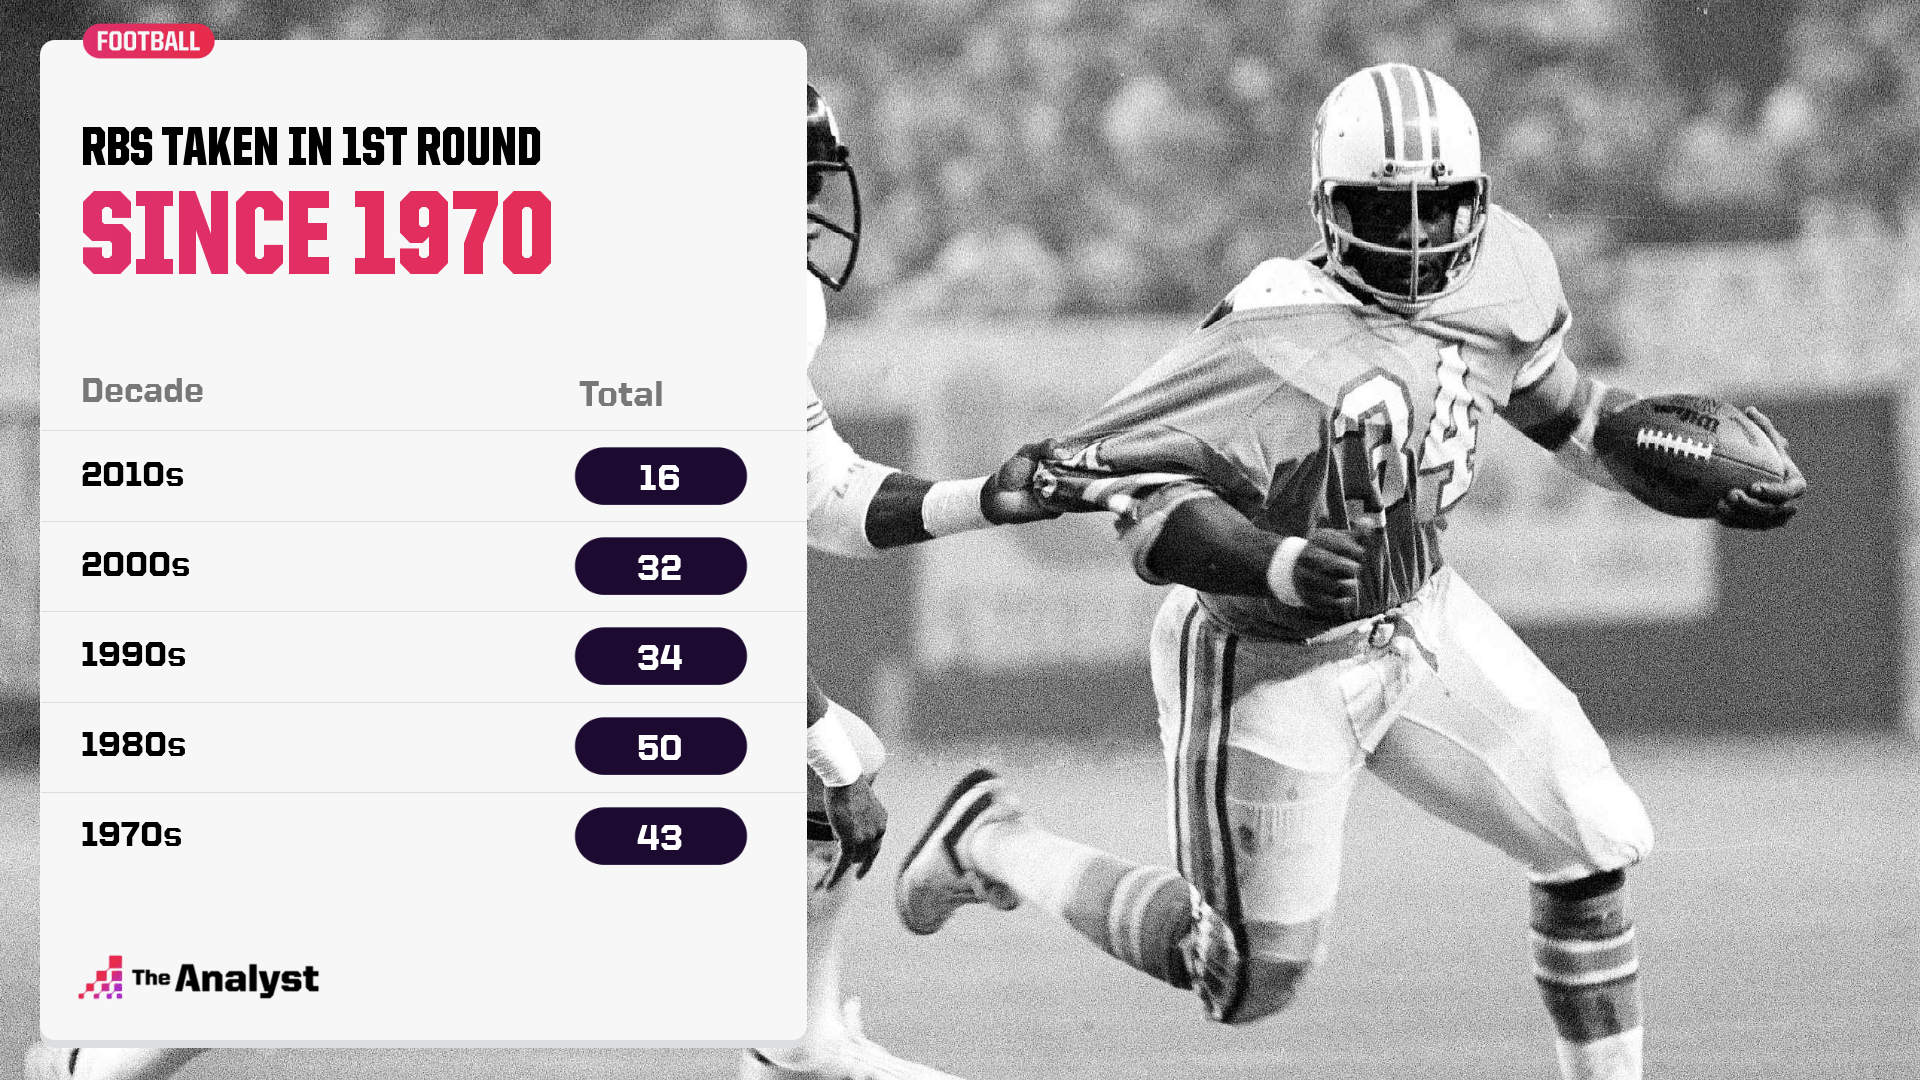 Running backs taken in the first round since 1970